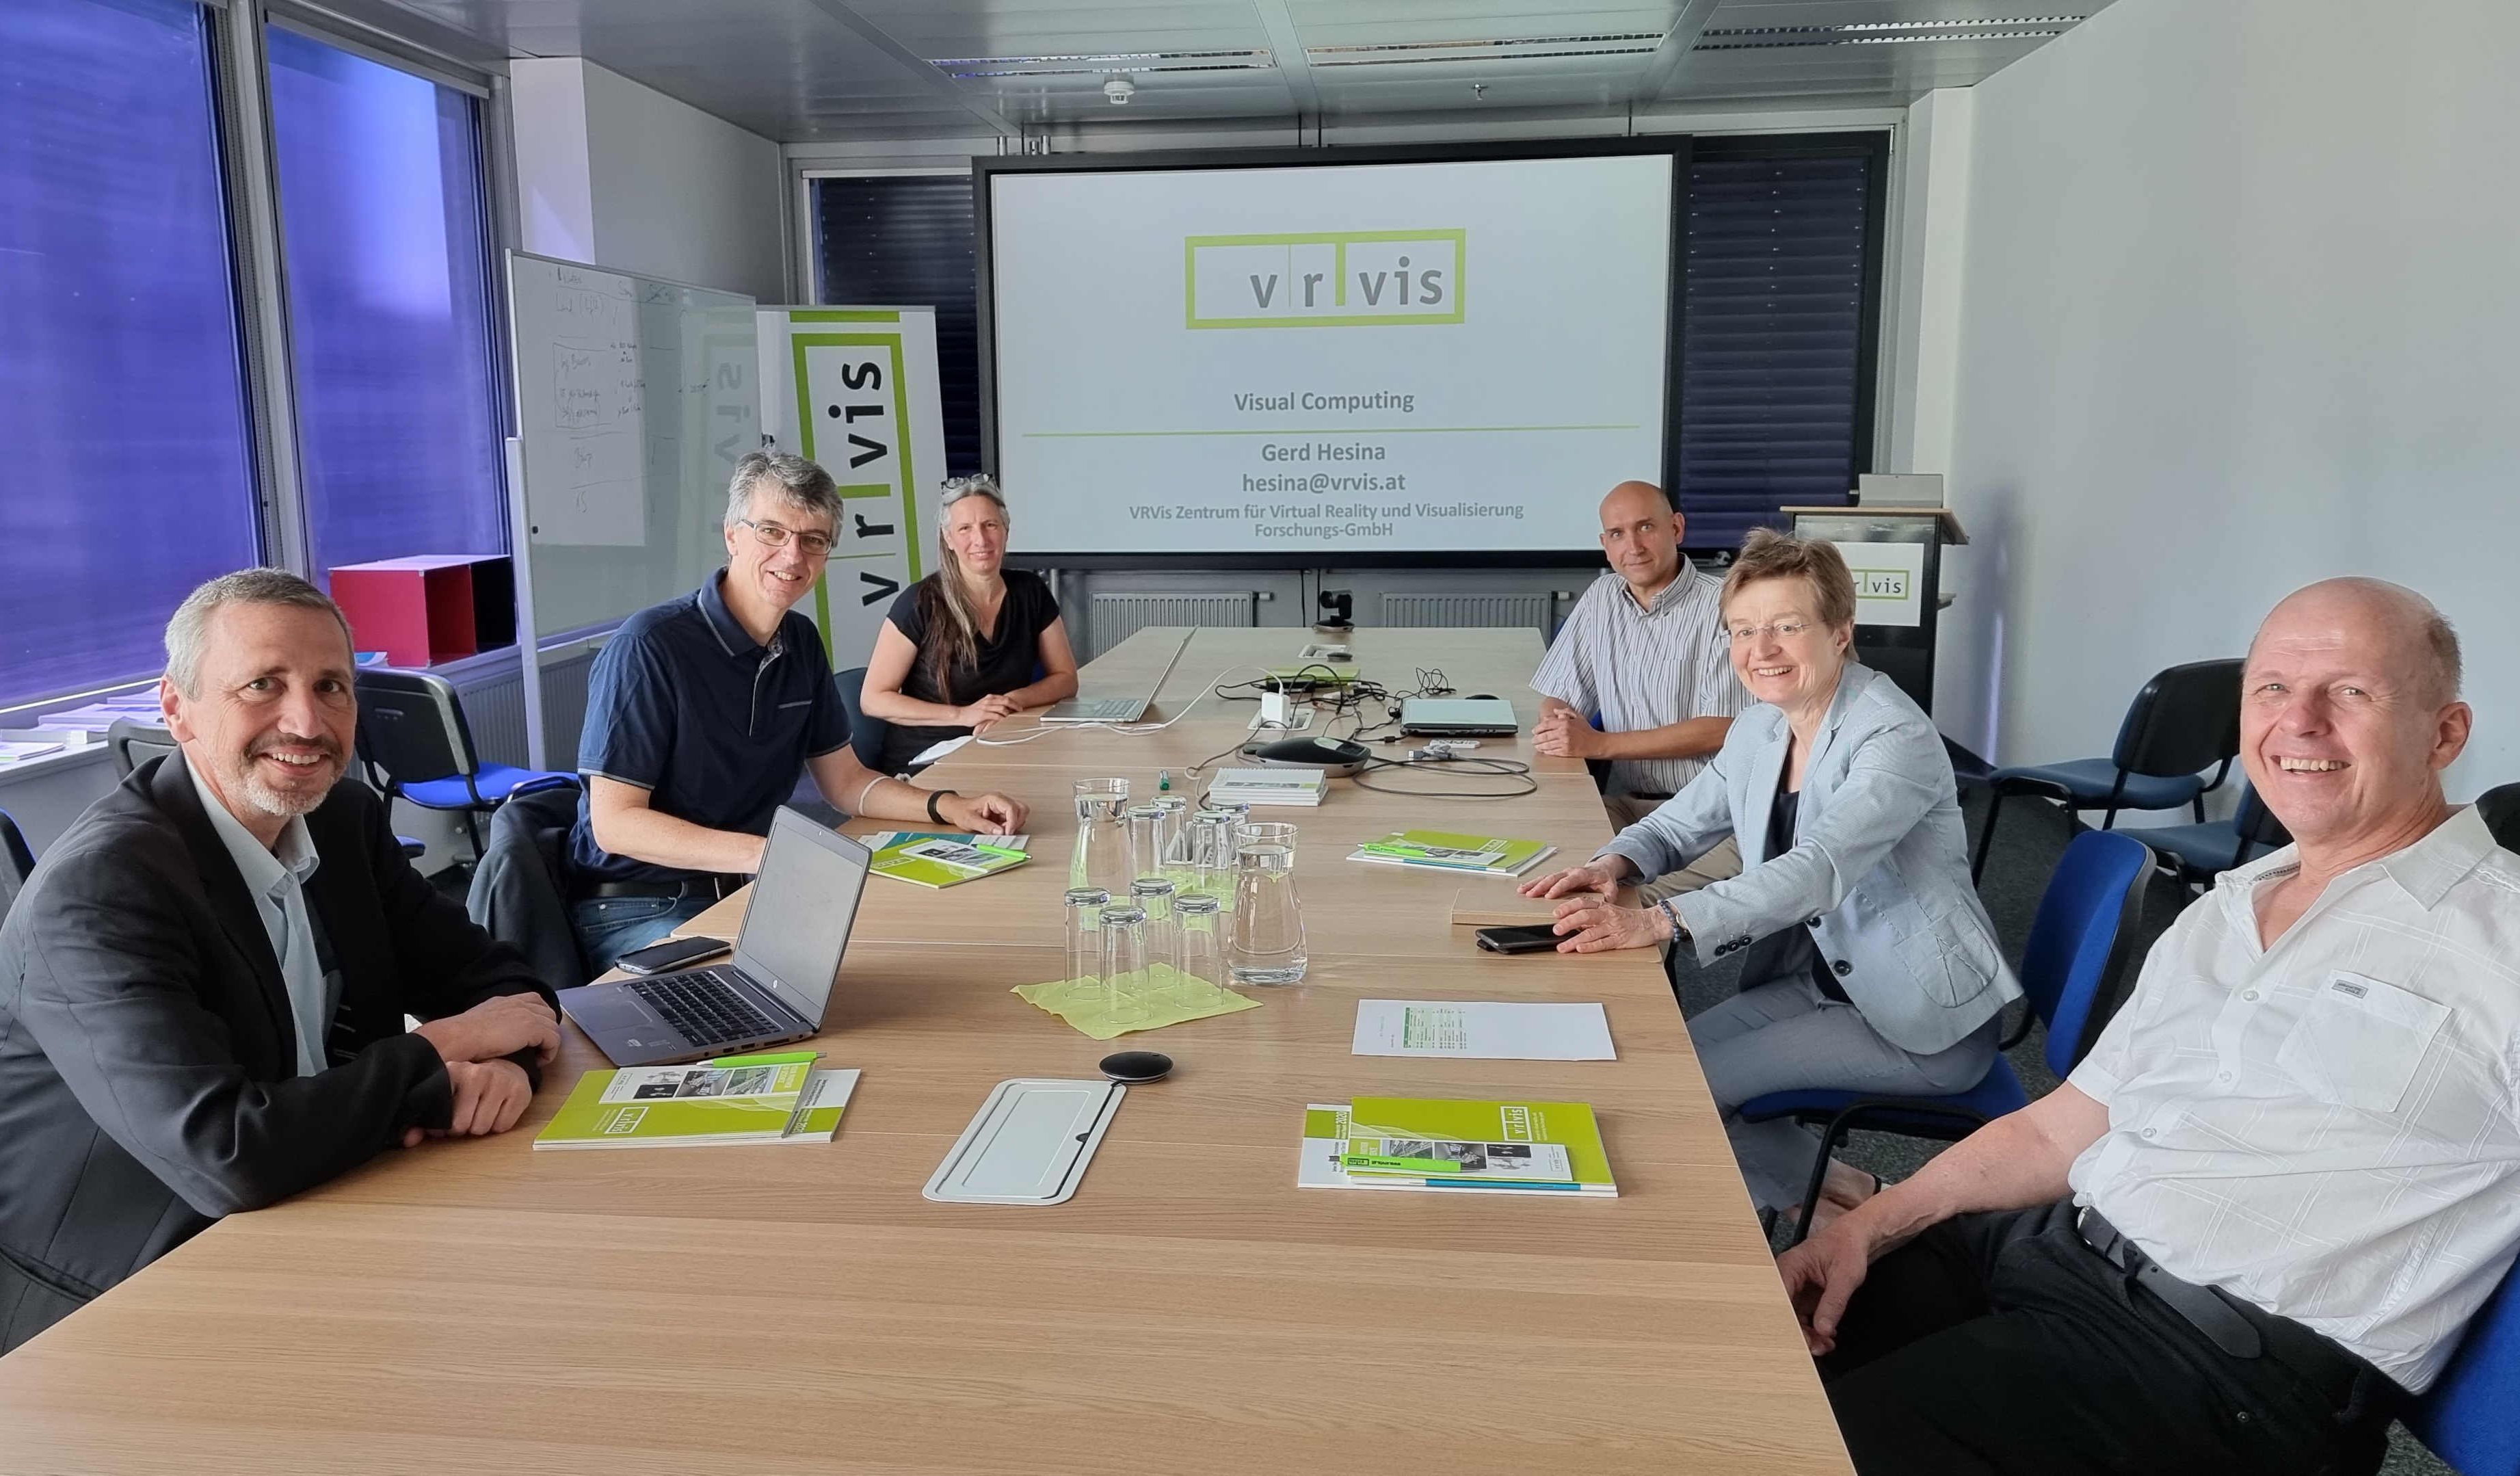 A group of researchers at a long table. At the end is a screen with the VRVis logo.